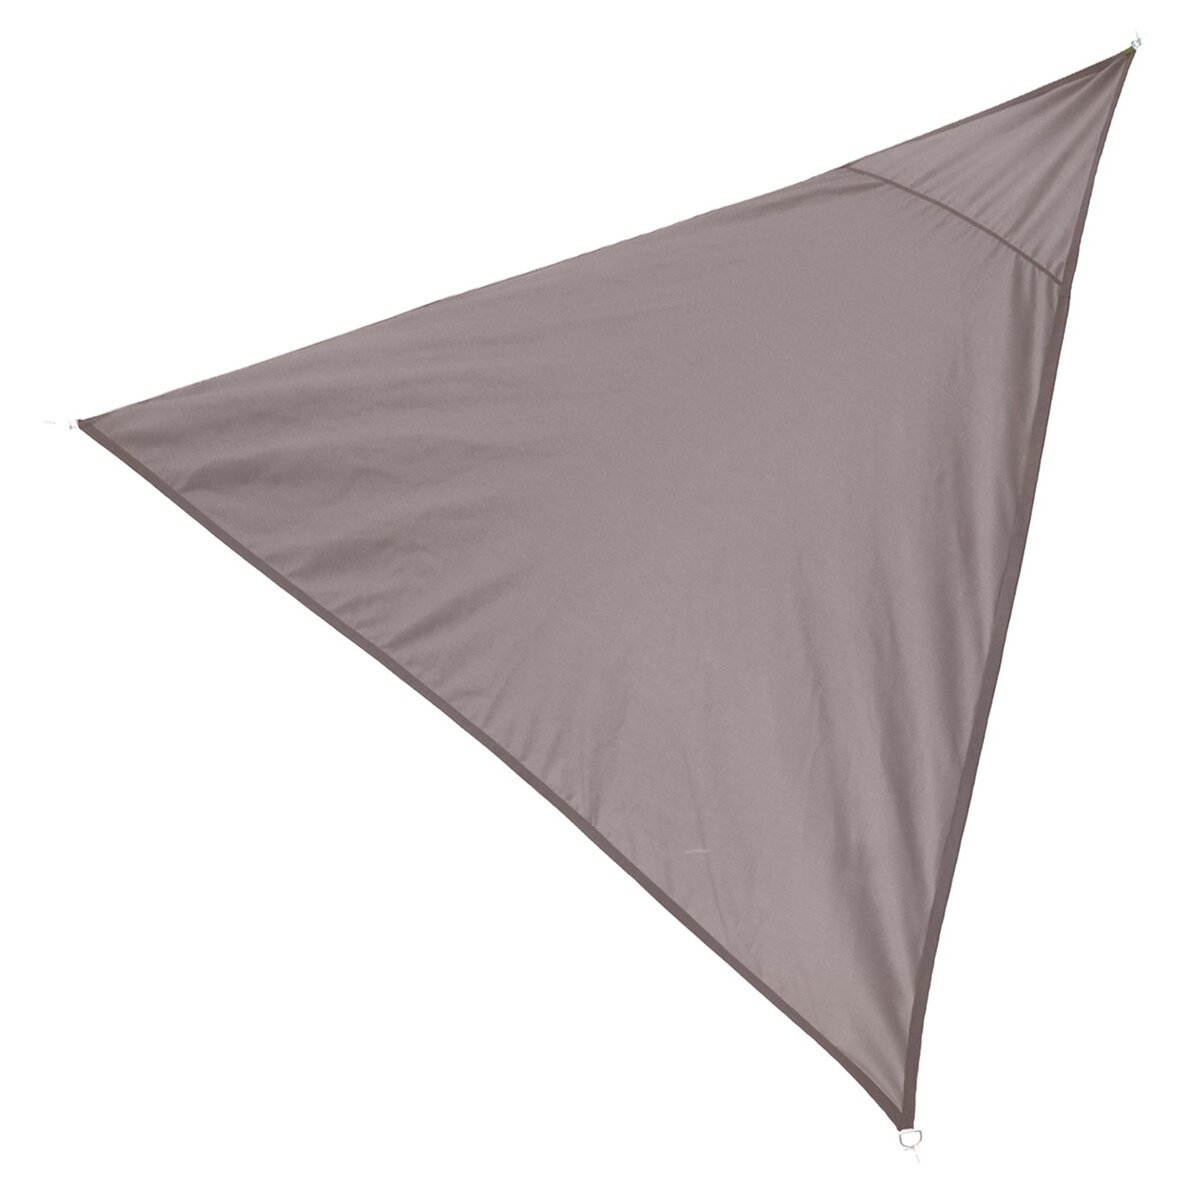 No name Voile d'ombrage 3.6x3.6x3.6 m taupe